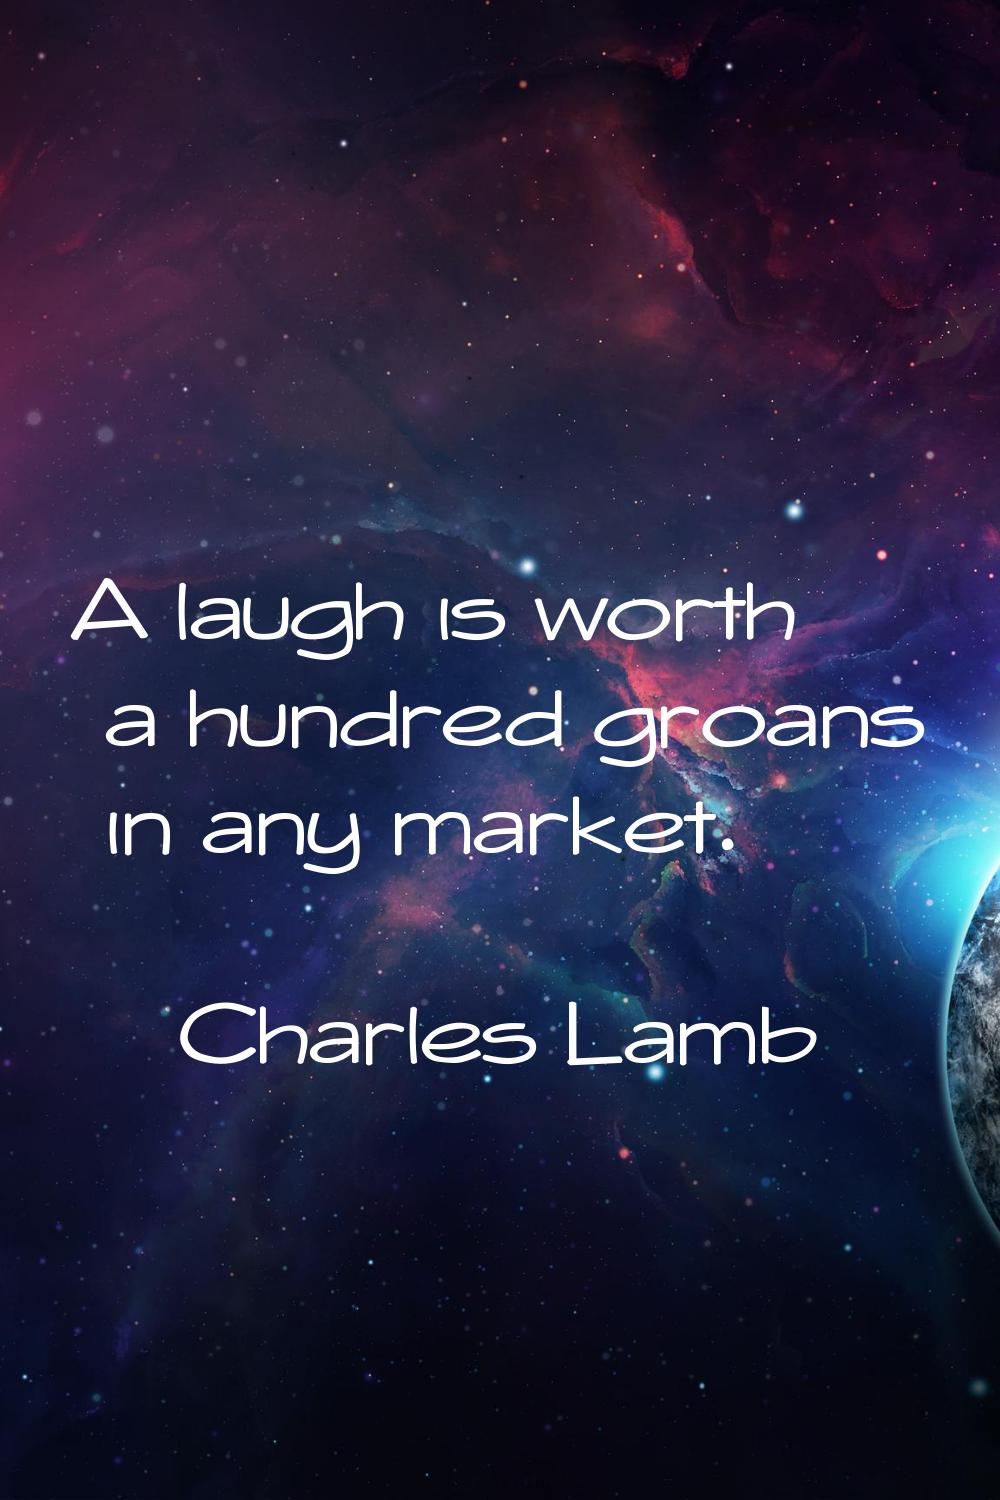 A laugh is worth a hundred groans in any market.